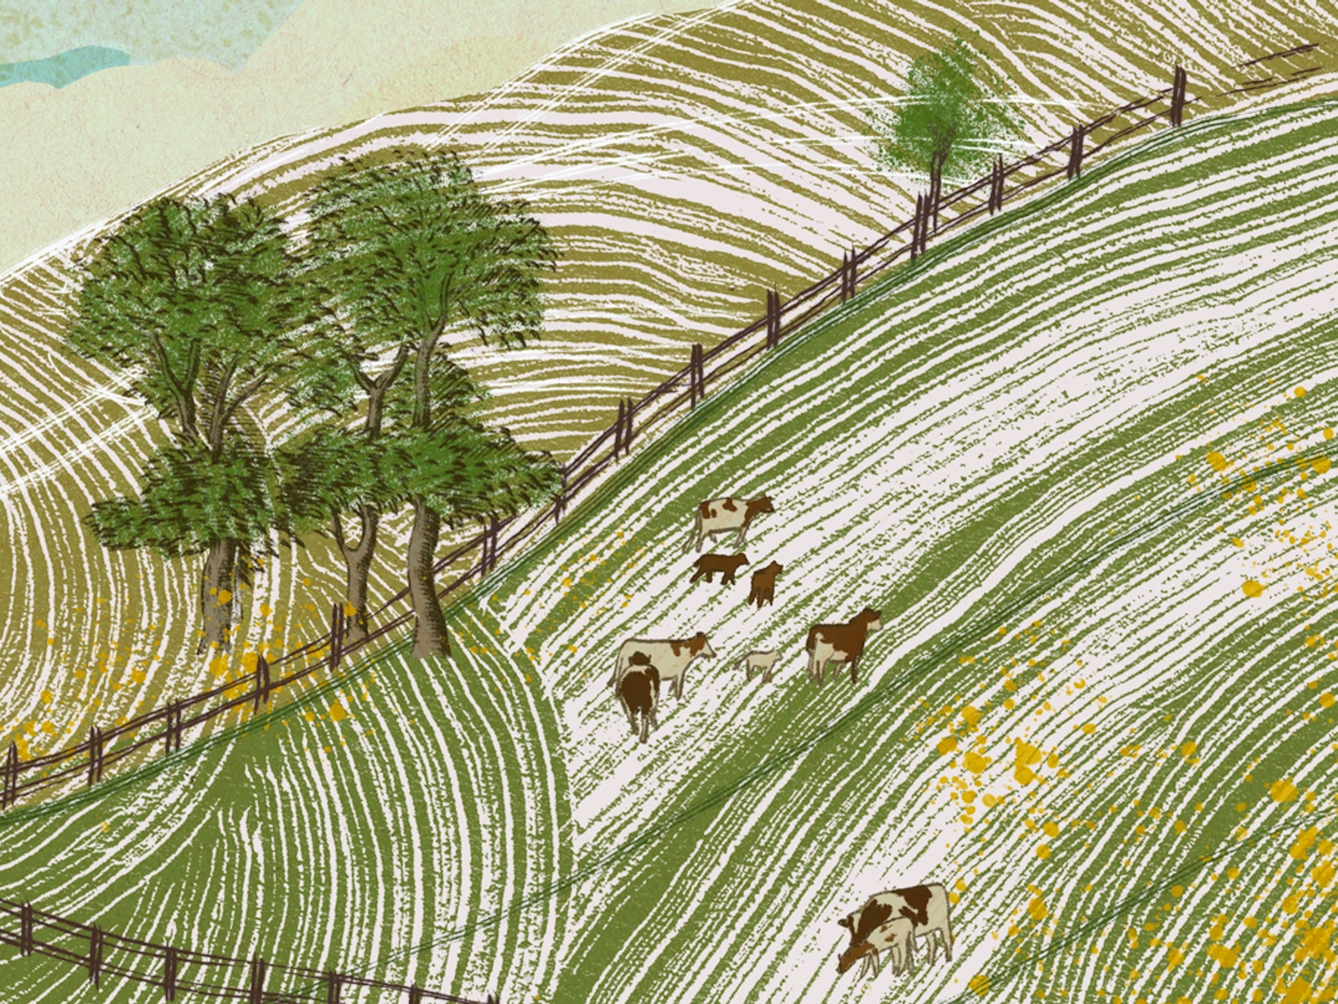 A digital illustration of rolling hills with fences and a small herd of cows. The hills are depicted with large strokes of differing shades of green, and also feature outcrops of trees. The cows are Friesian with large white and dark patches.